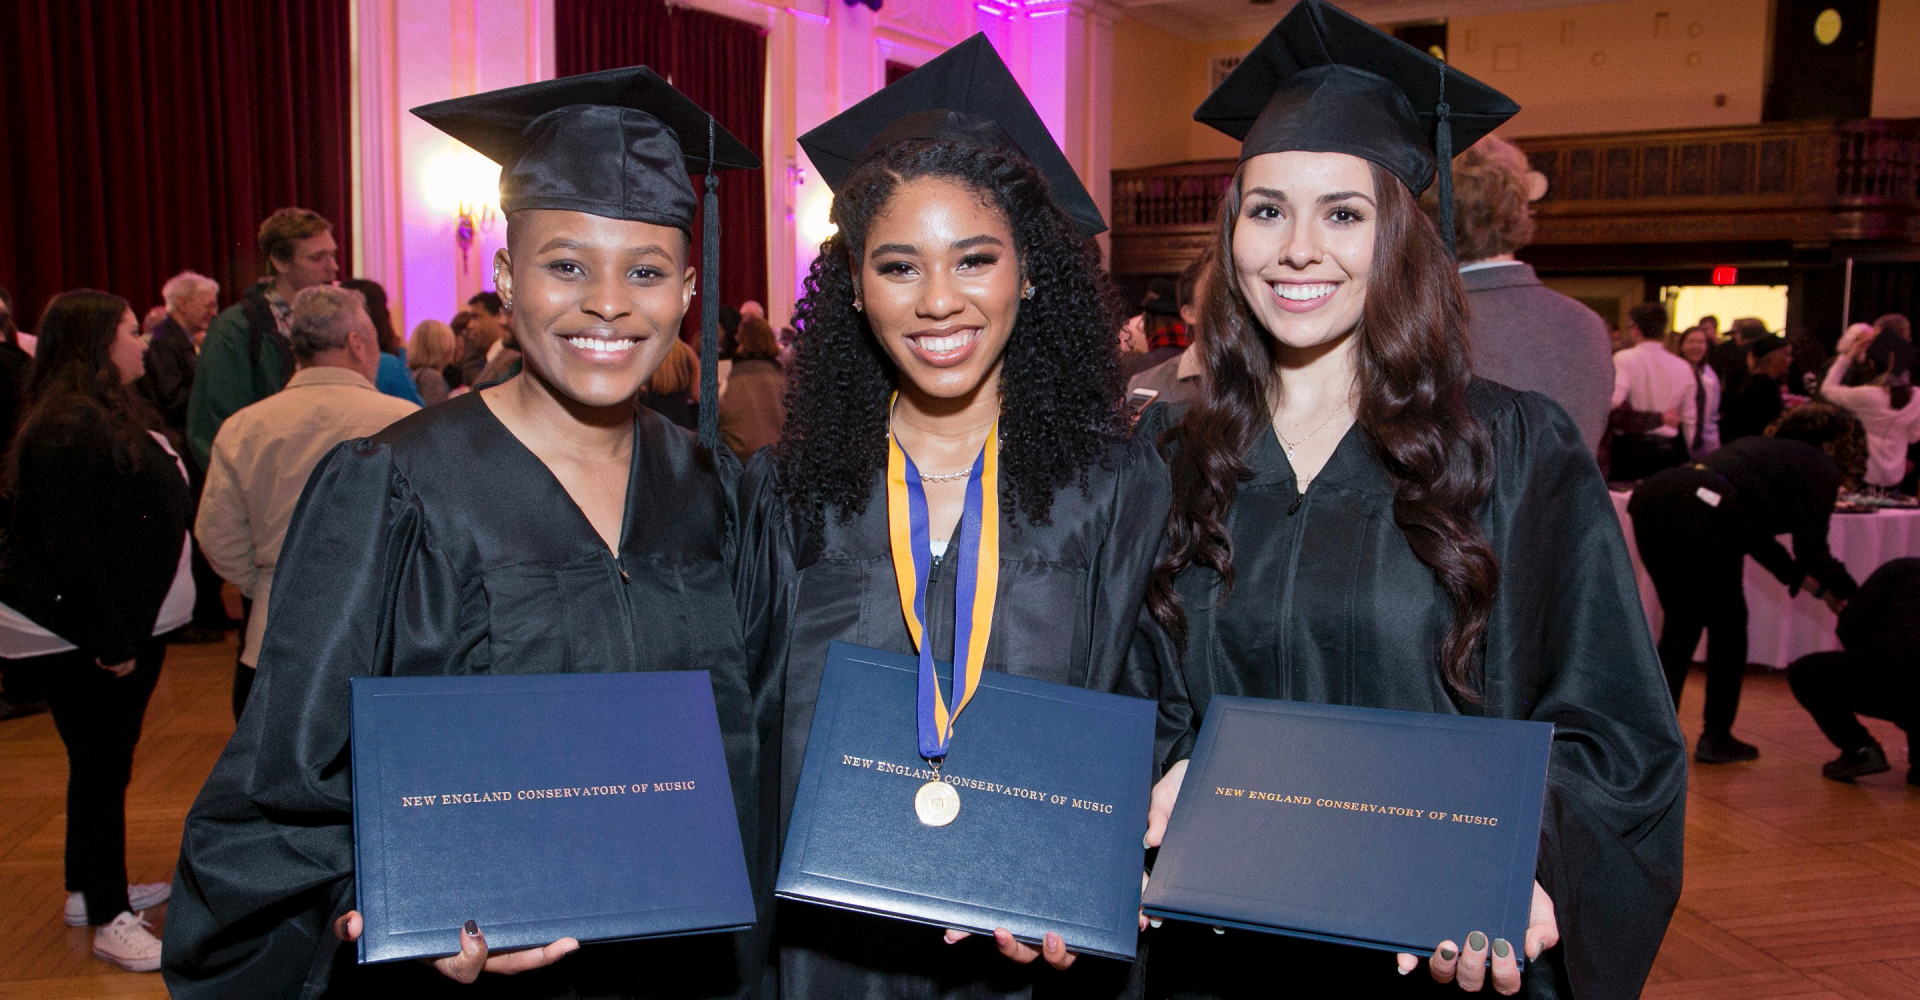 Three graduates smile and hold up their diplomas, wearing caps and gowns